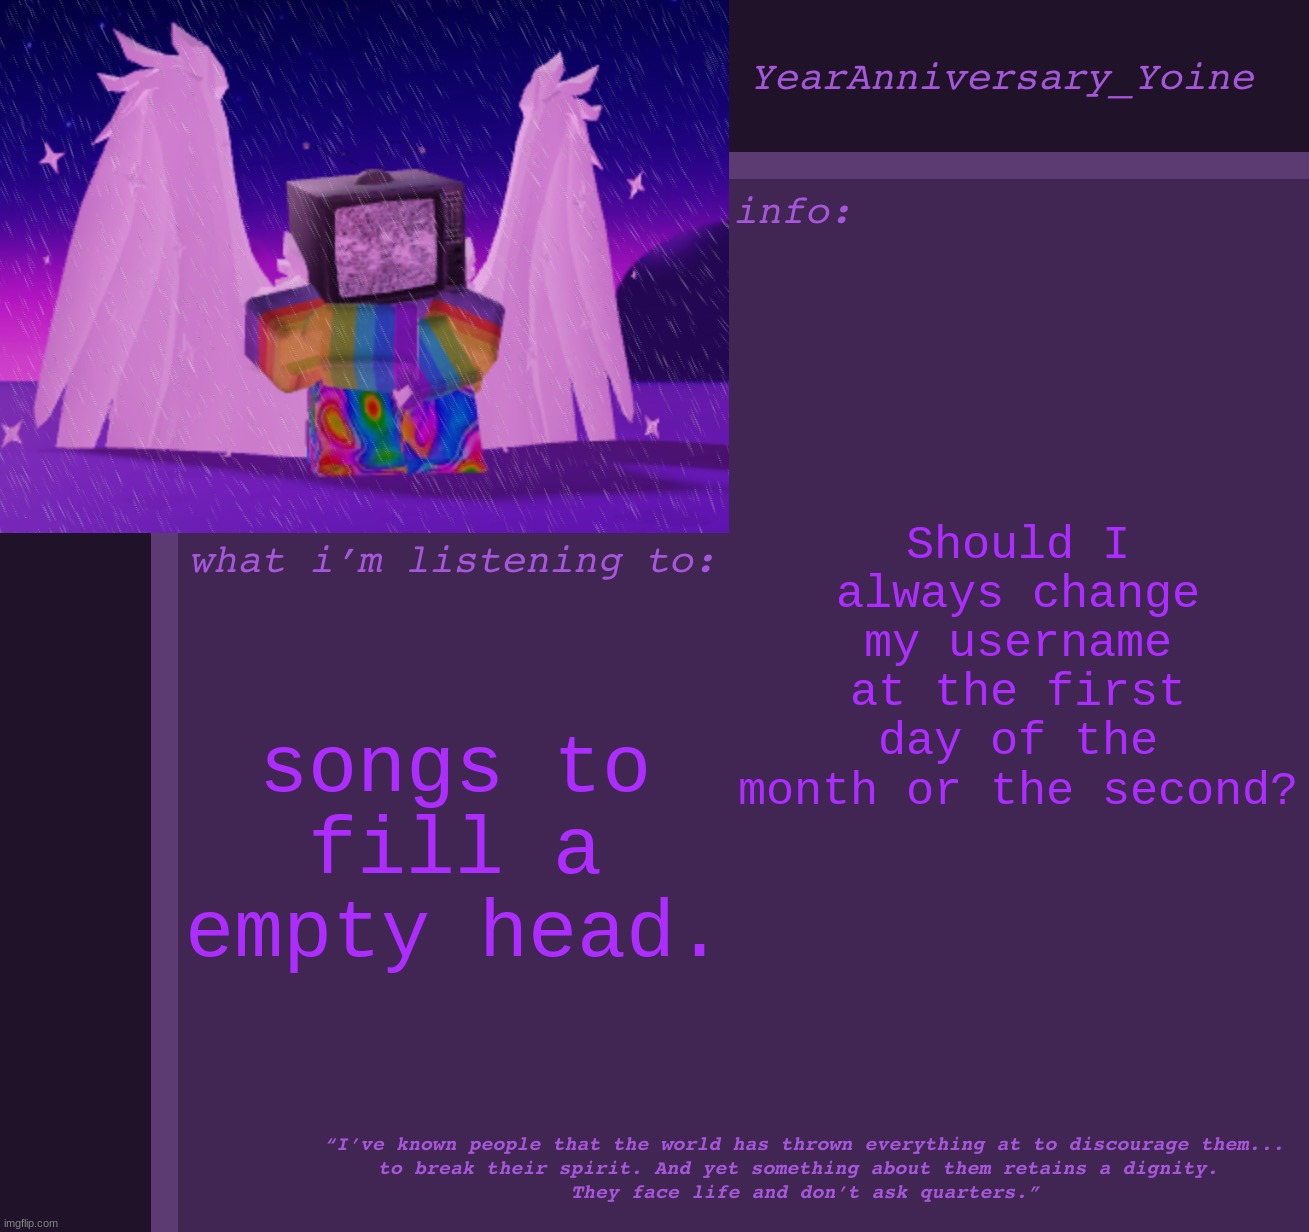 YearAnniversary_Yoine’s Announcement Template | Should I always change my username at the first day of the month or the second? songs to fill a empty head. | made w/ Imgflip meme maker